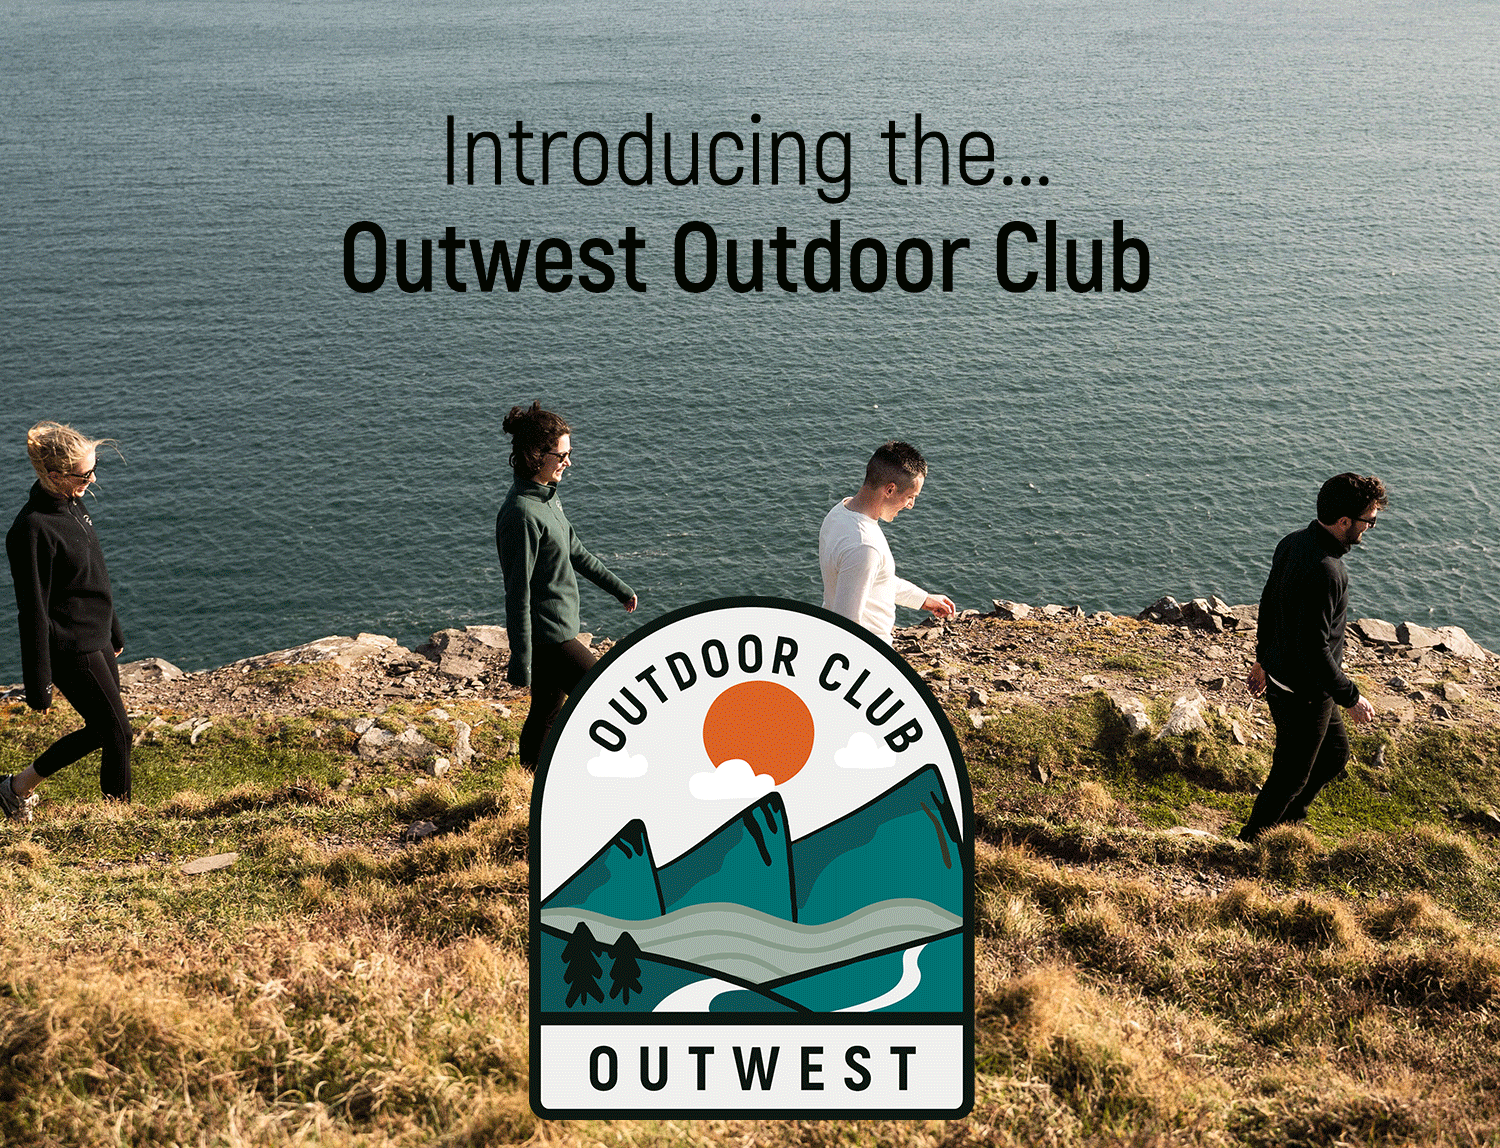 Introducing.... The Outwest Outdoor Club